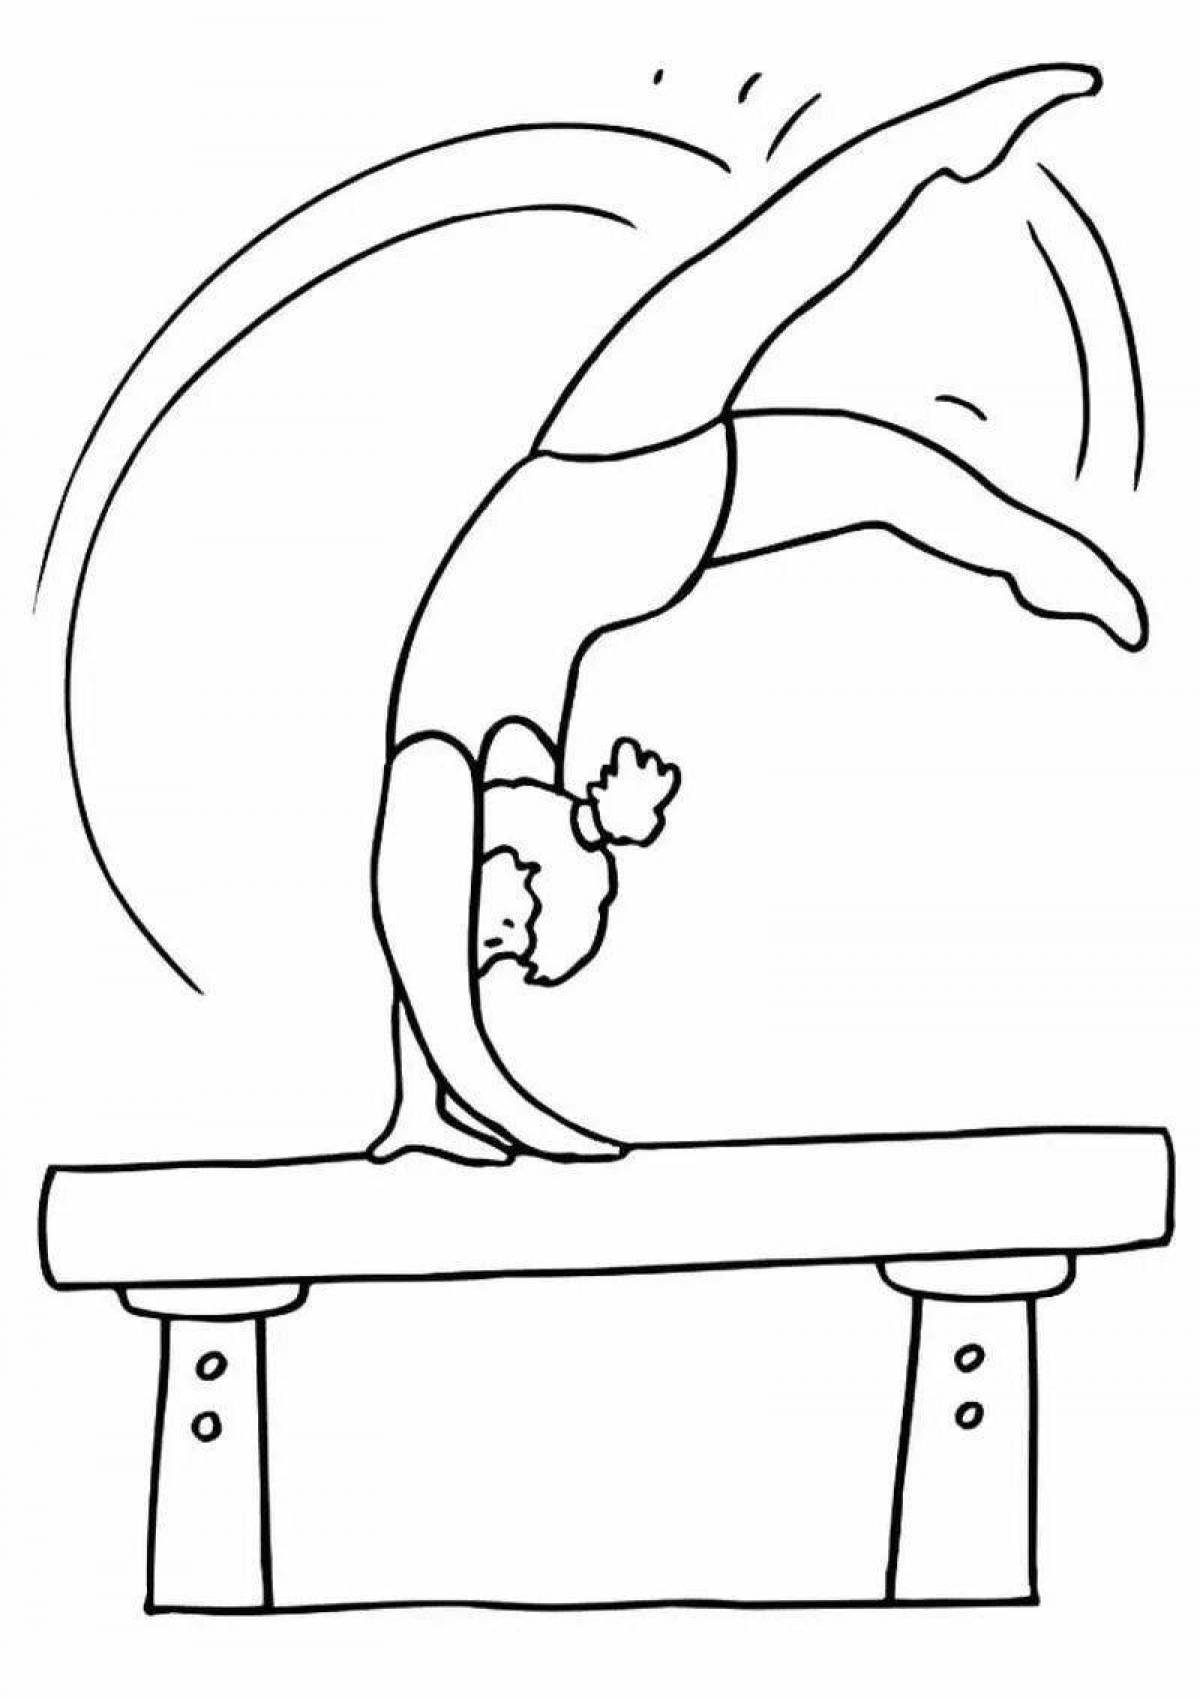 Brave gymnast coloring pages for kids